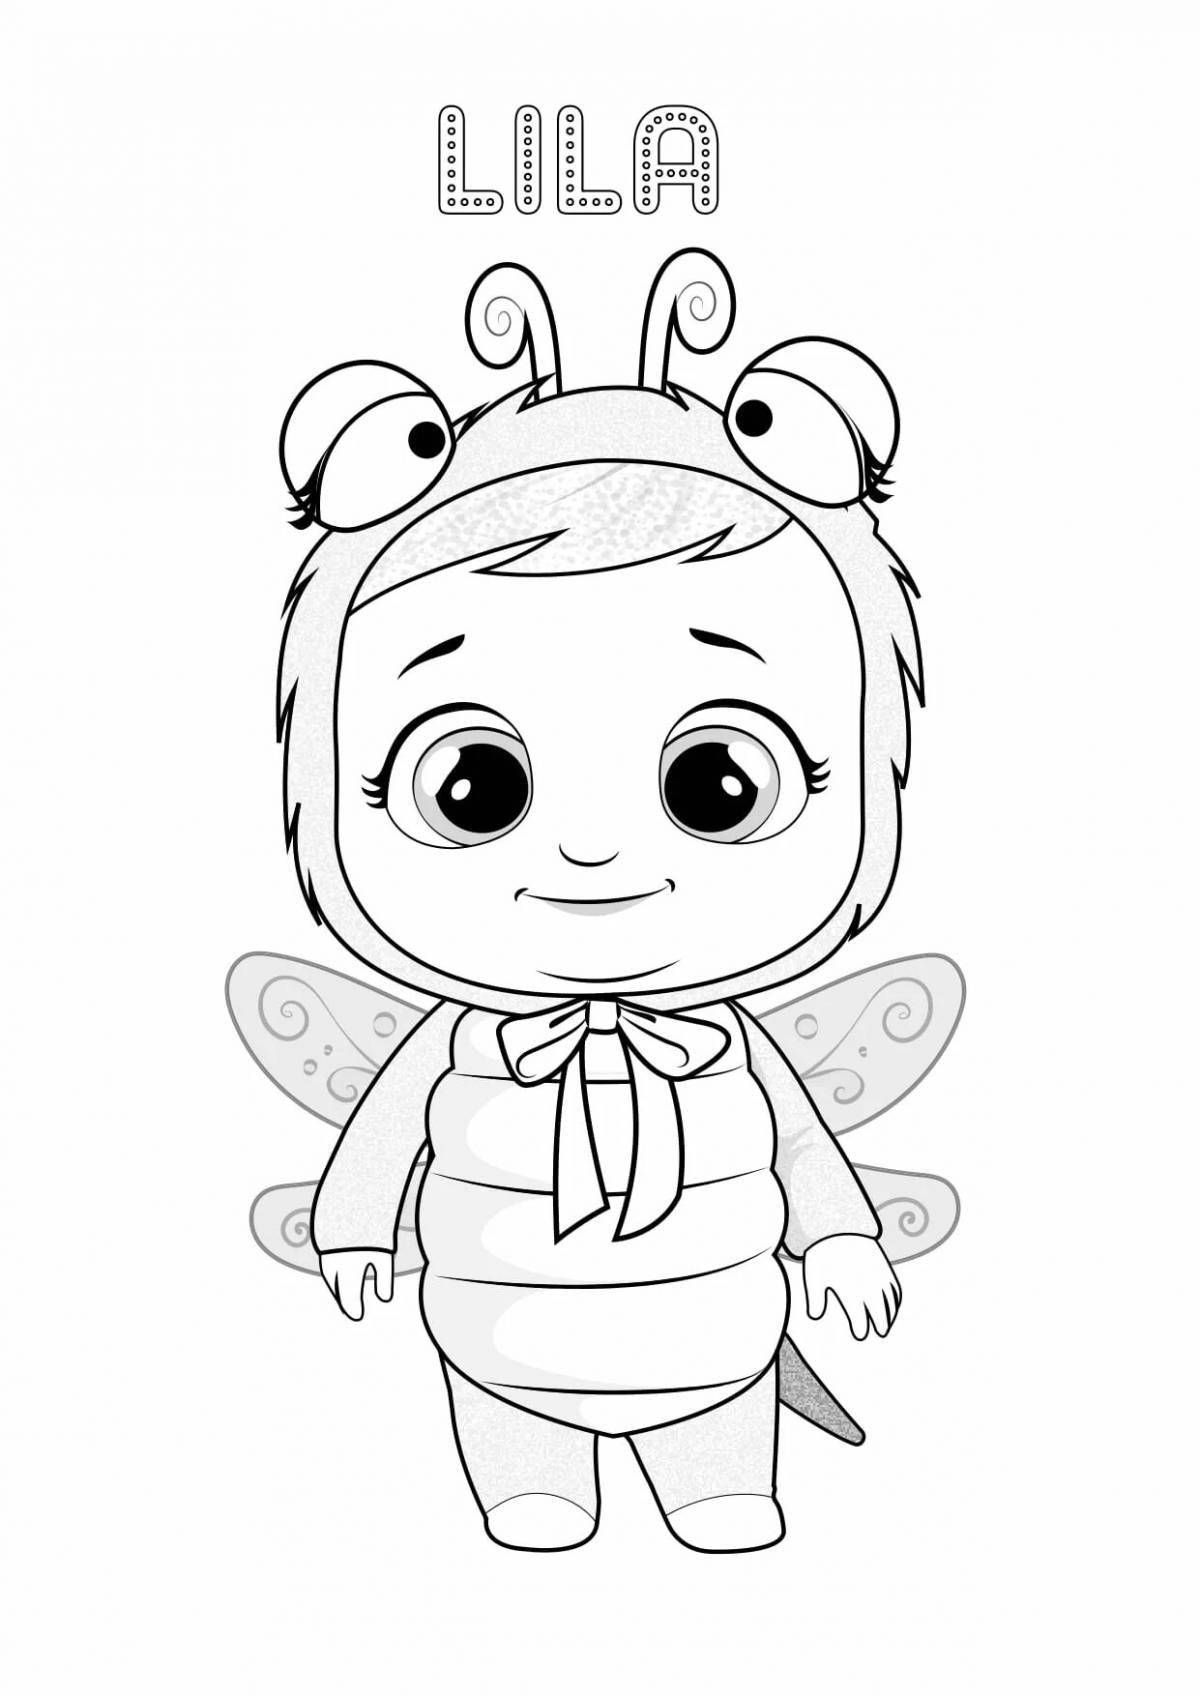 Playful crying babies coloring page